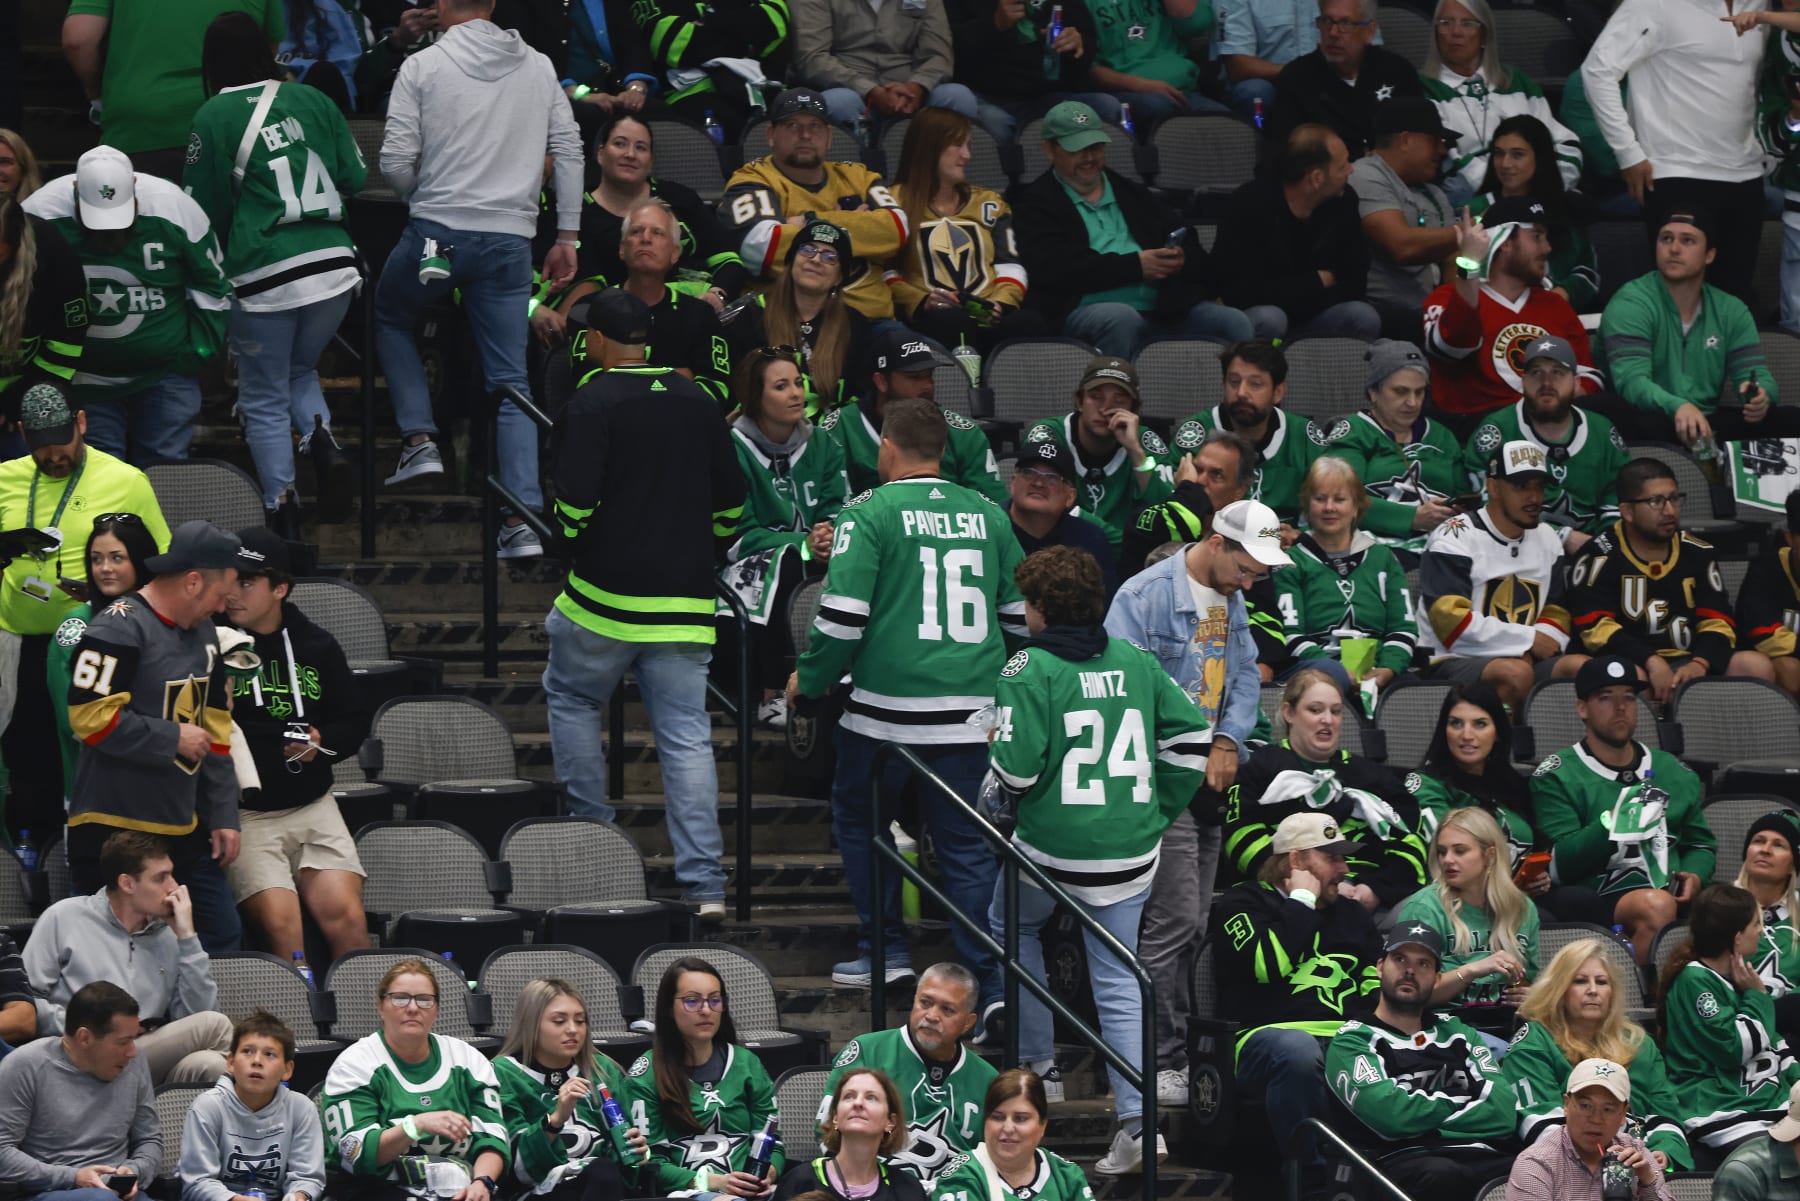 Dallas Stars issue apology following Game 3 incident with fans